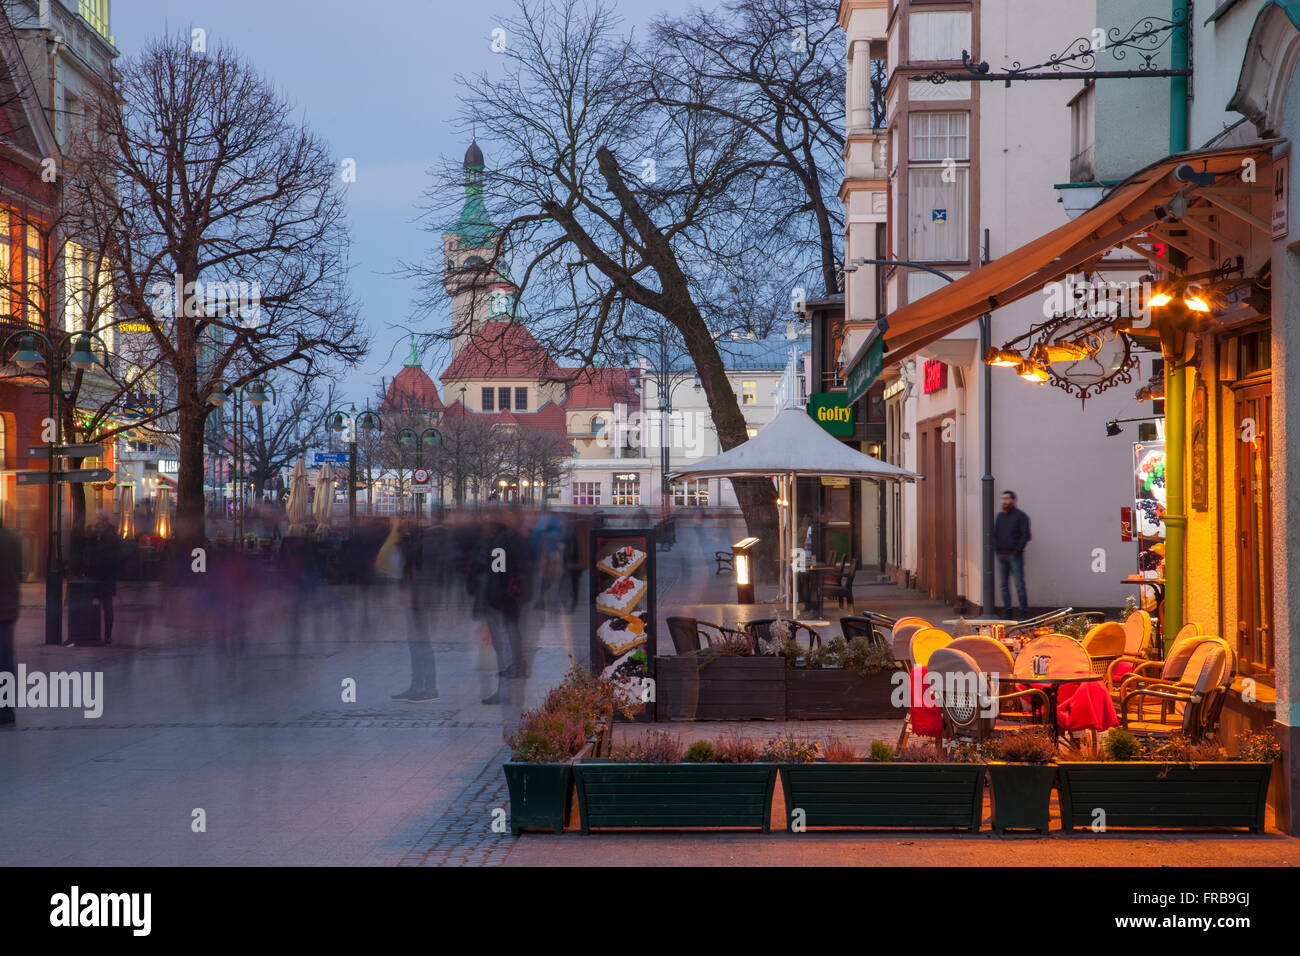 Evening at Bohaterow Monte Cassino street in Sopot, Poland. Stock Photo